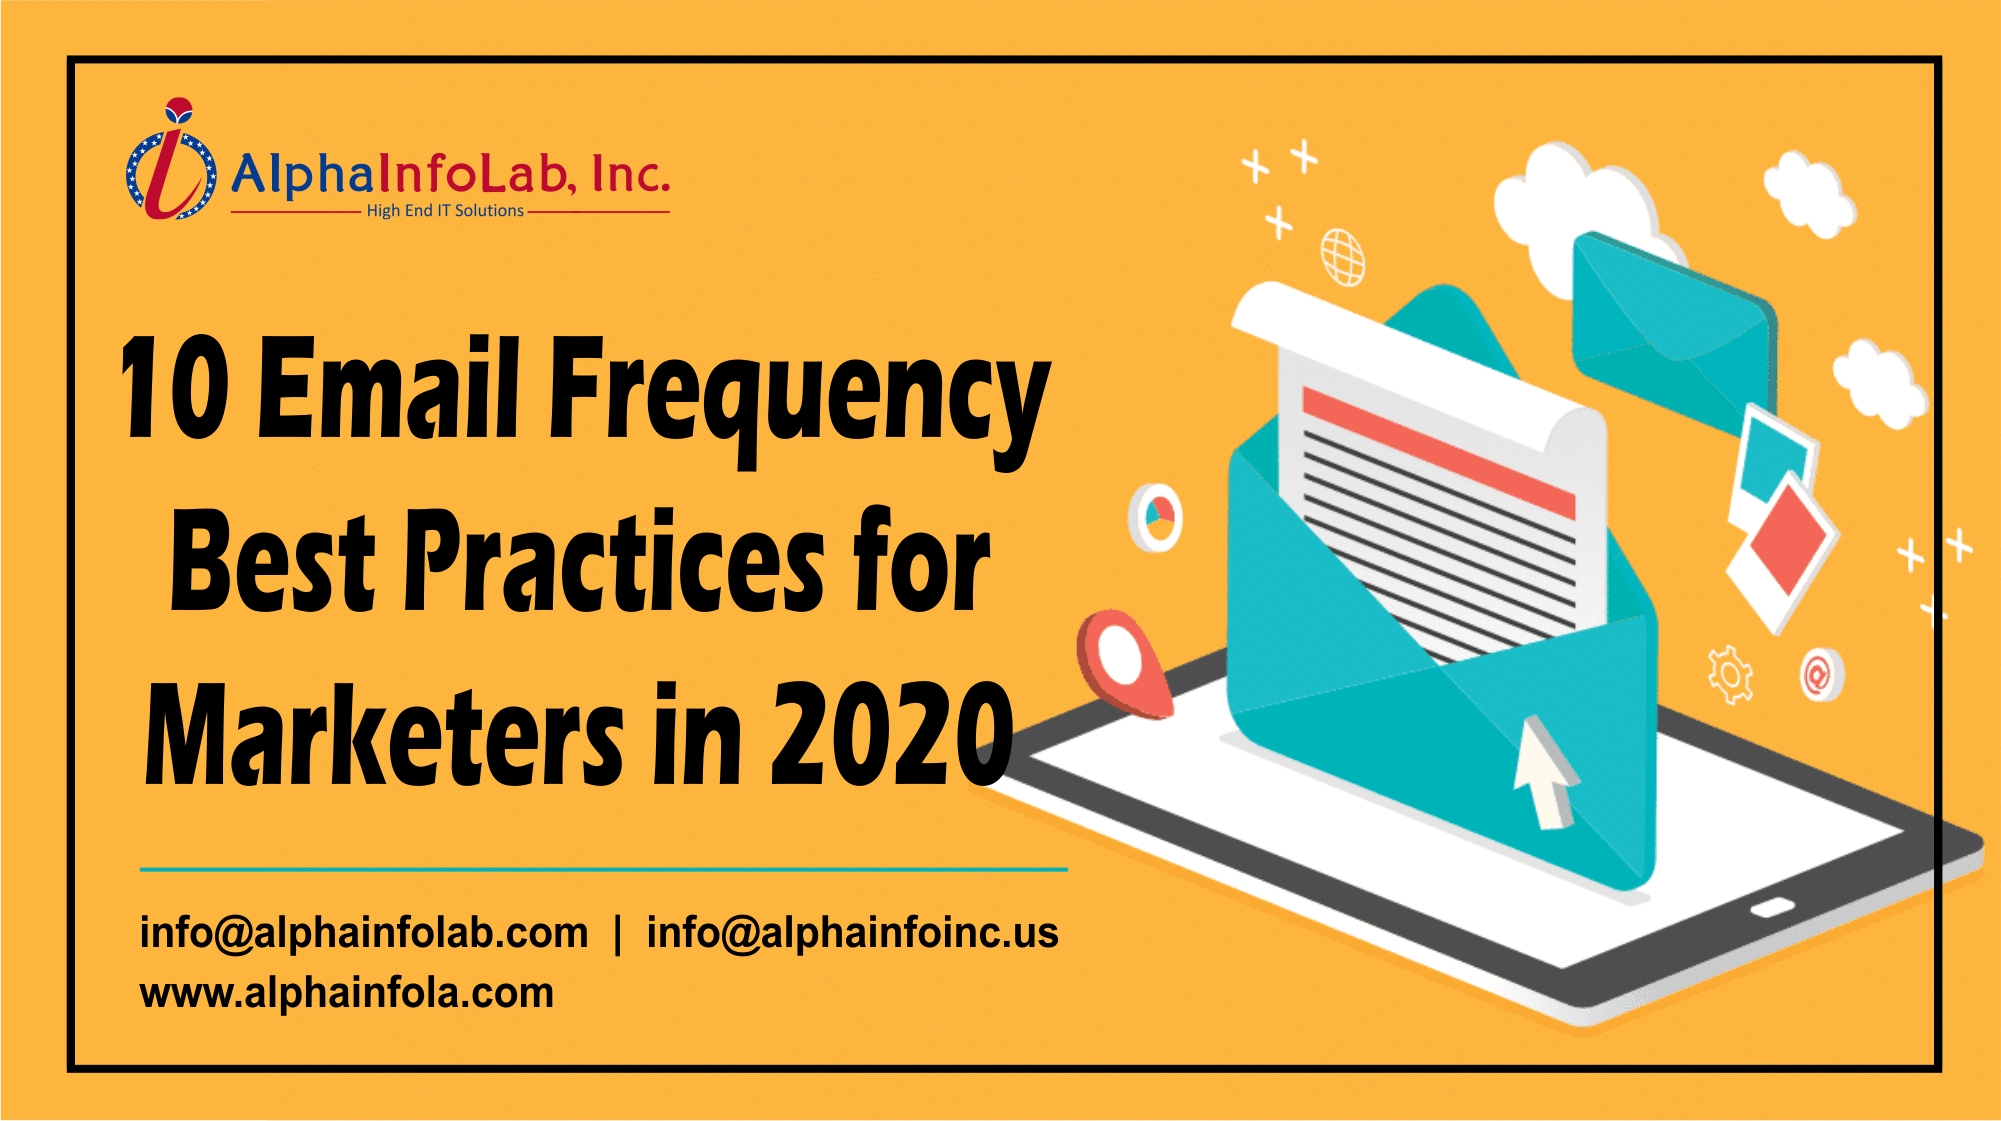 10 Email Marketing Best Practices for Marketers in 2020